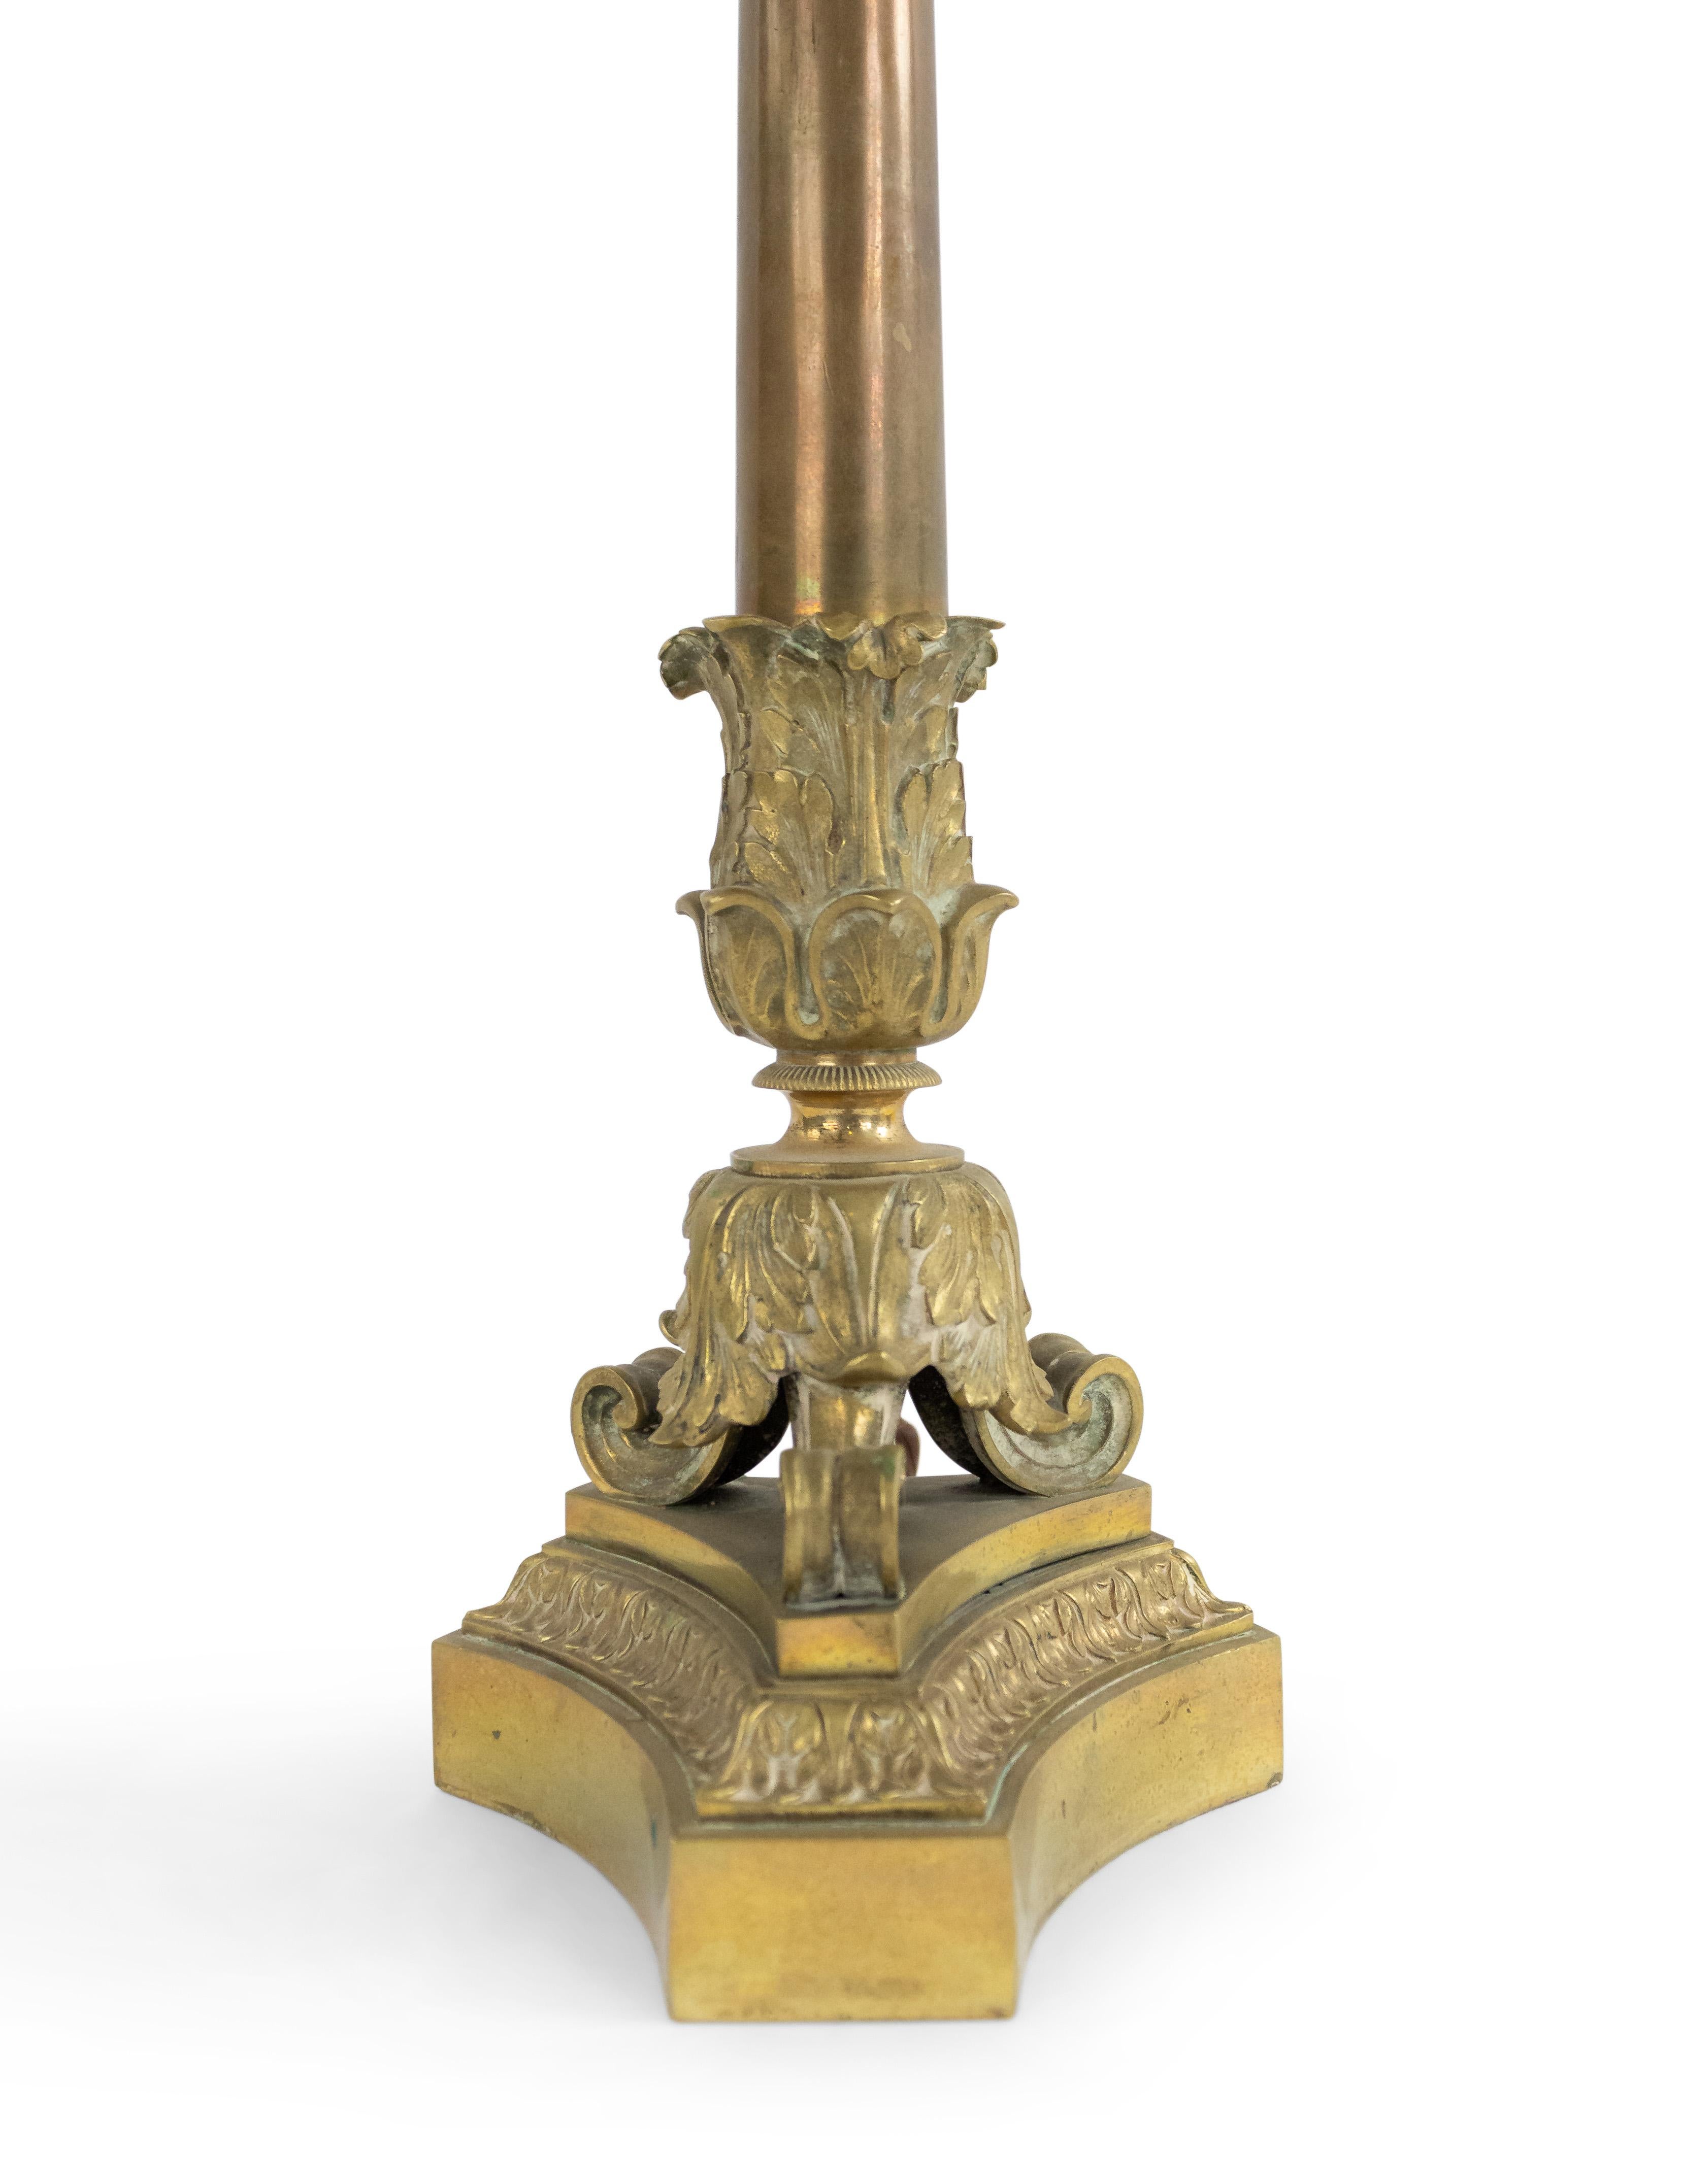 French Louis XVI style (19th Century) 3 arm candelabra with a column over a triangular base with claw feet now wired as a lamp.